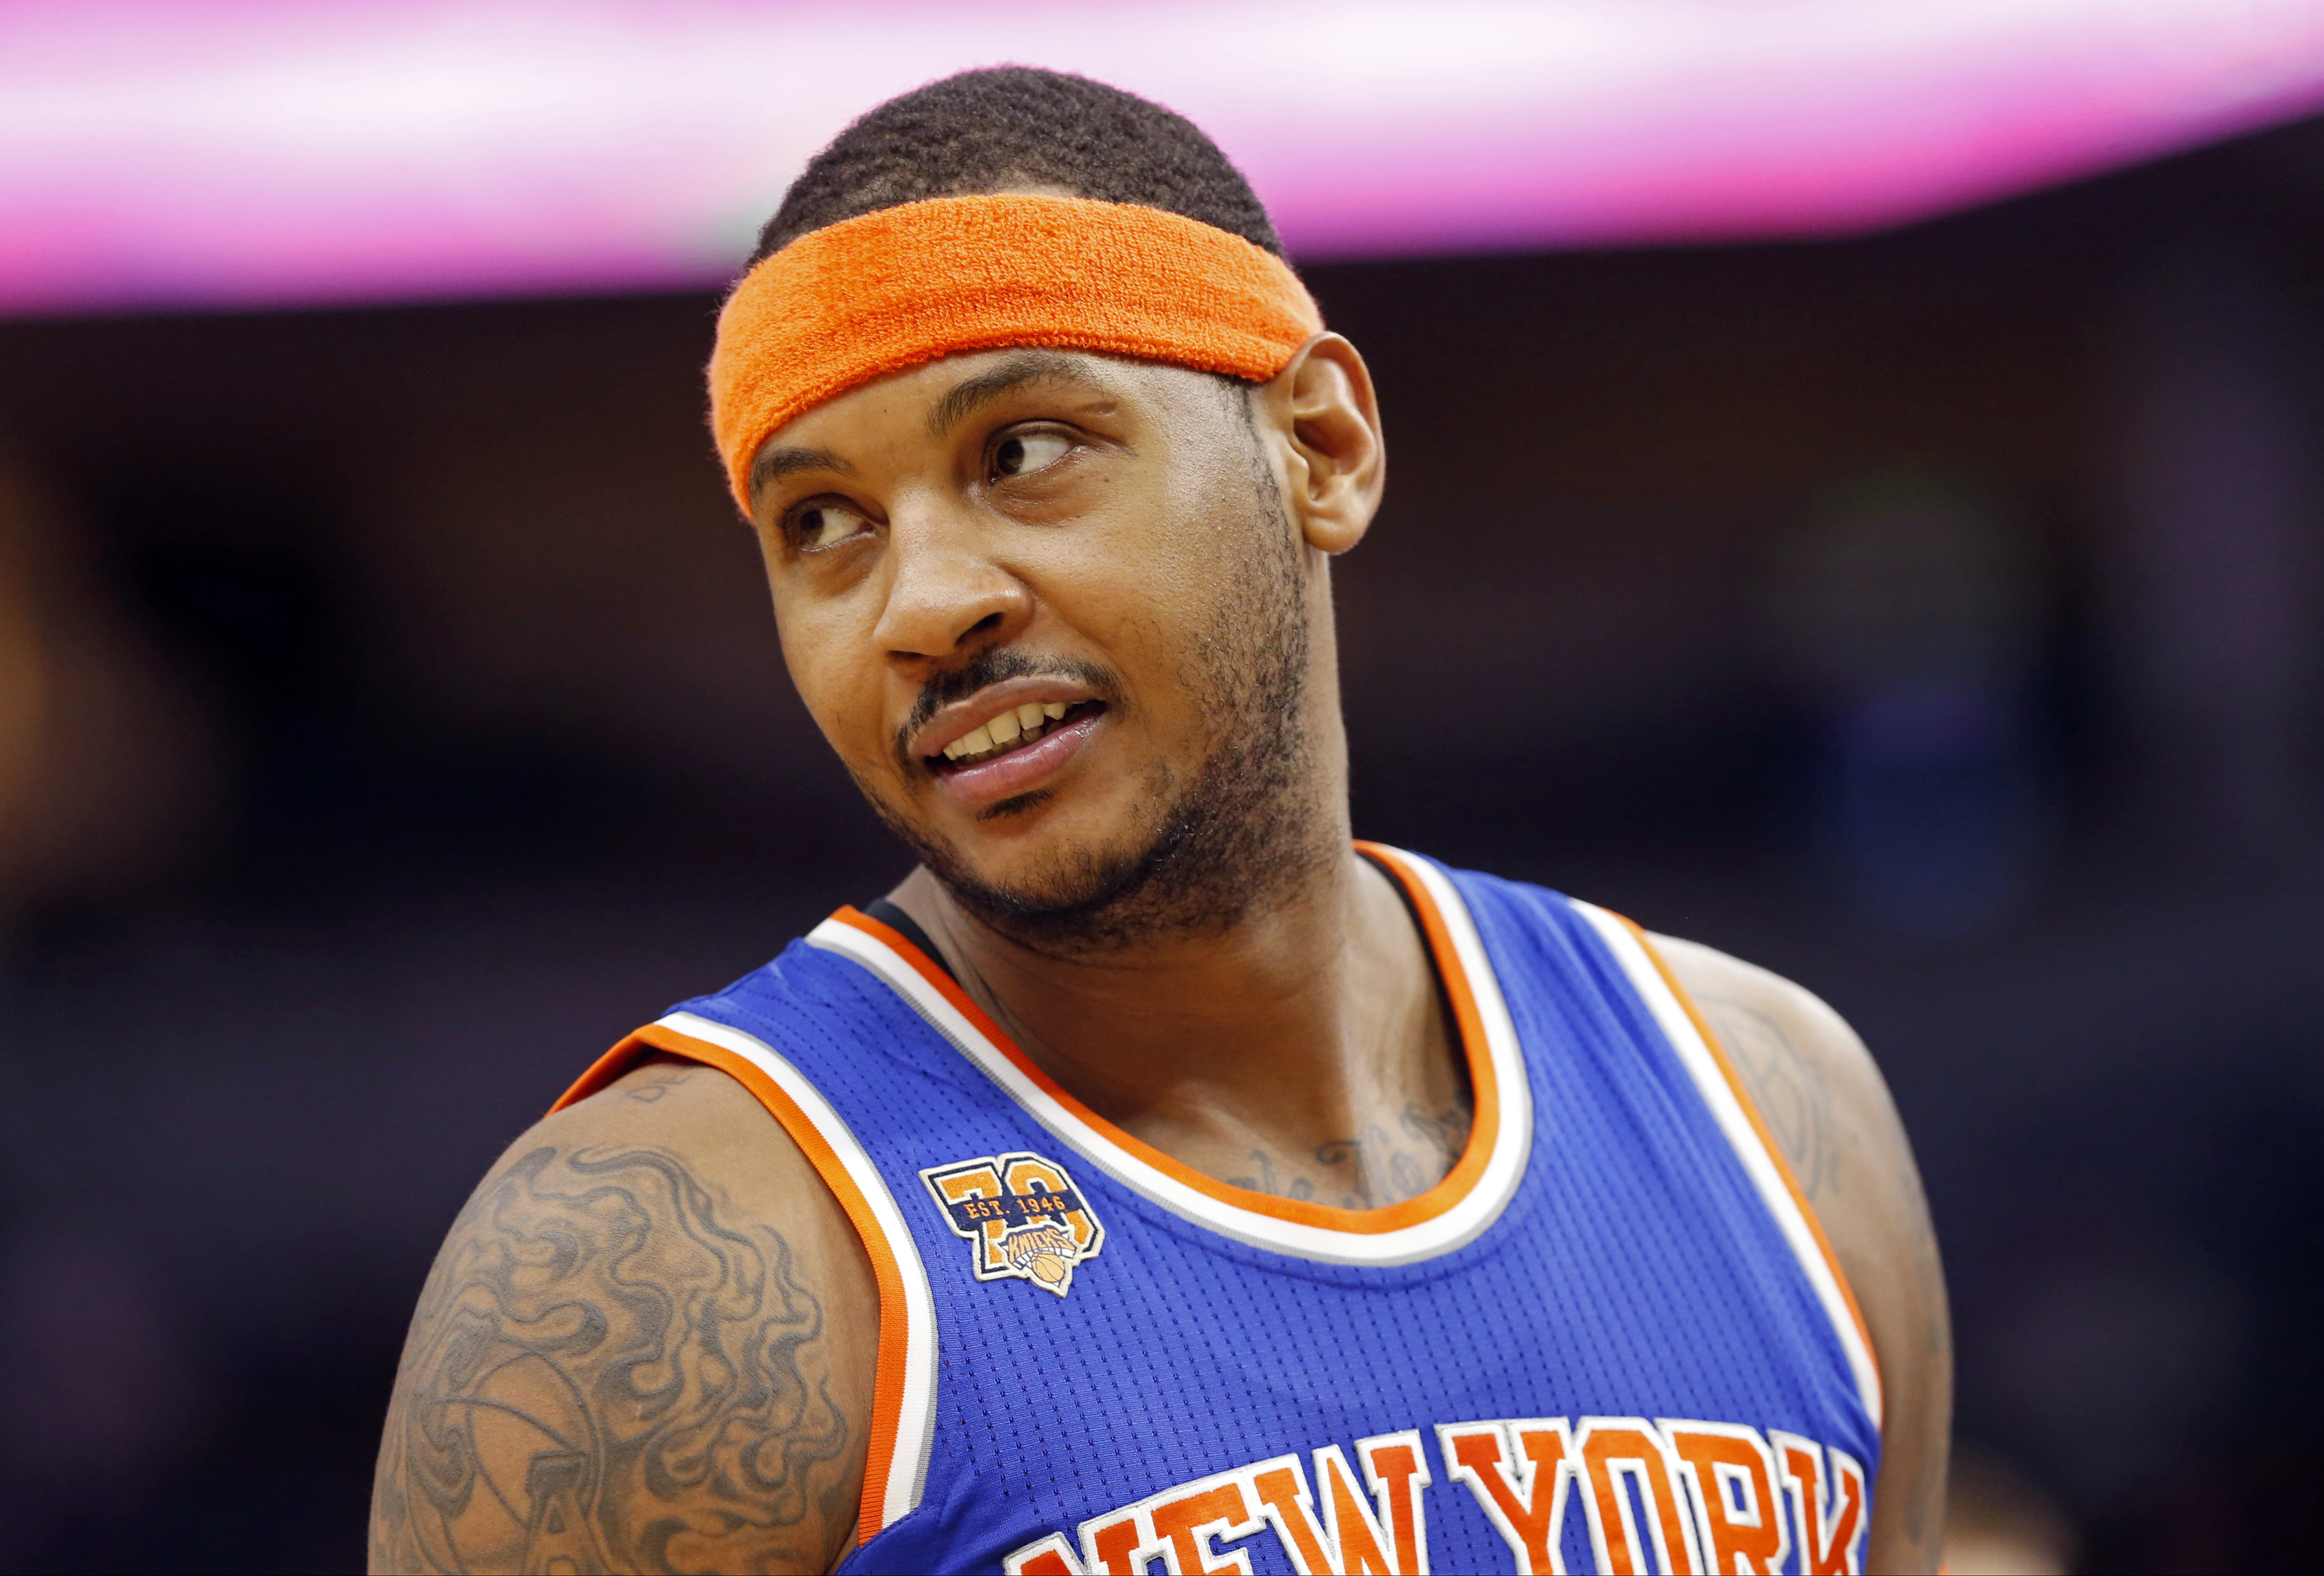 Carmelo Anthony working on TV series following his life, career 